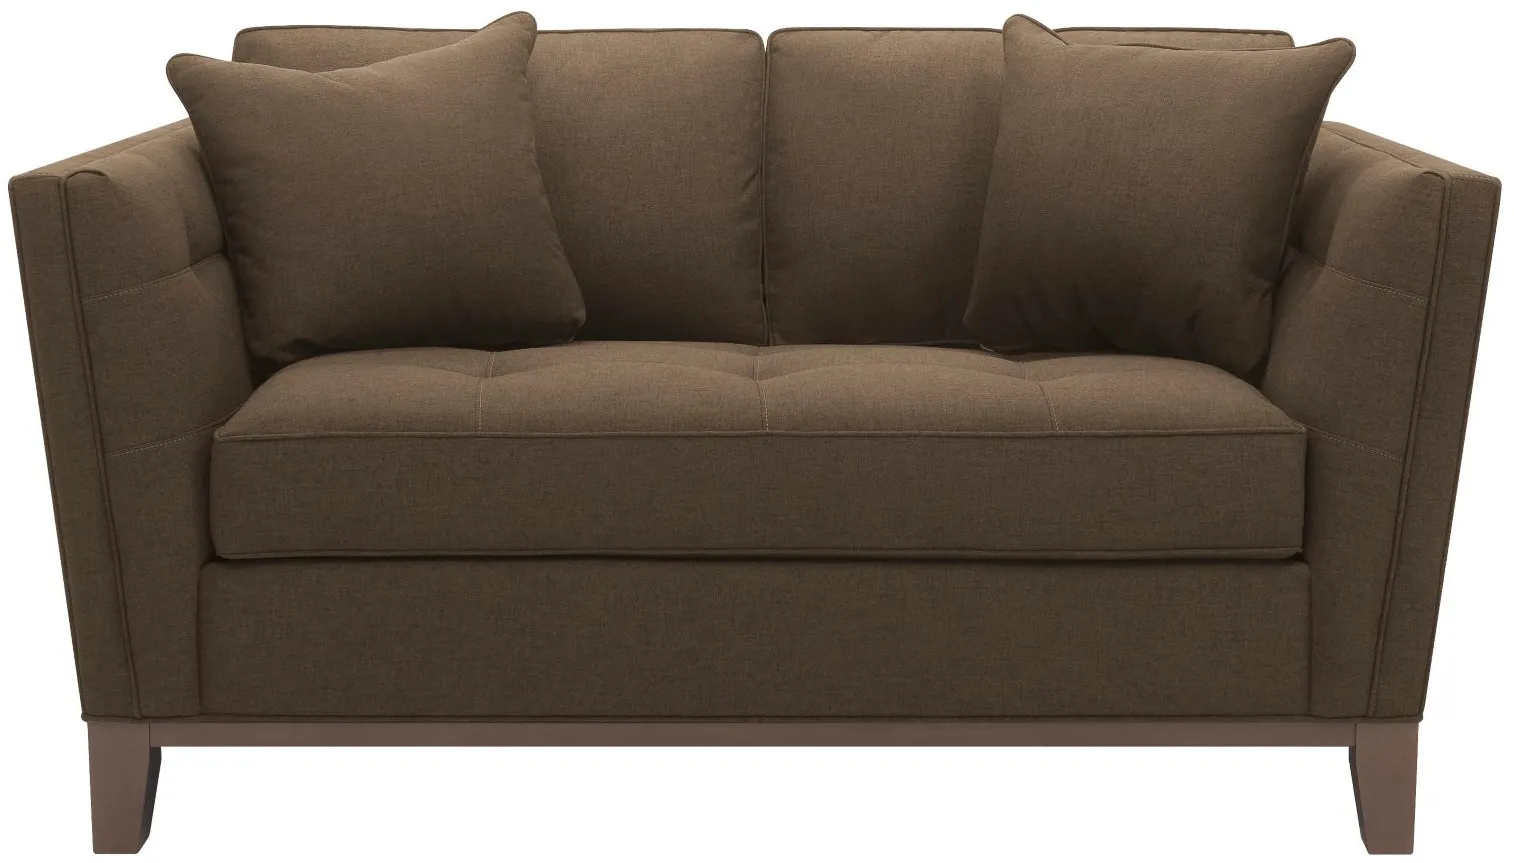 Macauley Loveseat in Santa Rosa Taupe by H.M. Richards